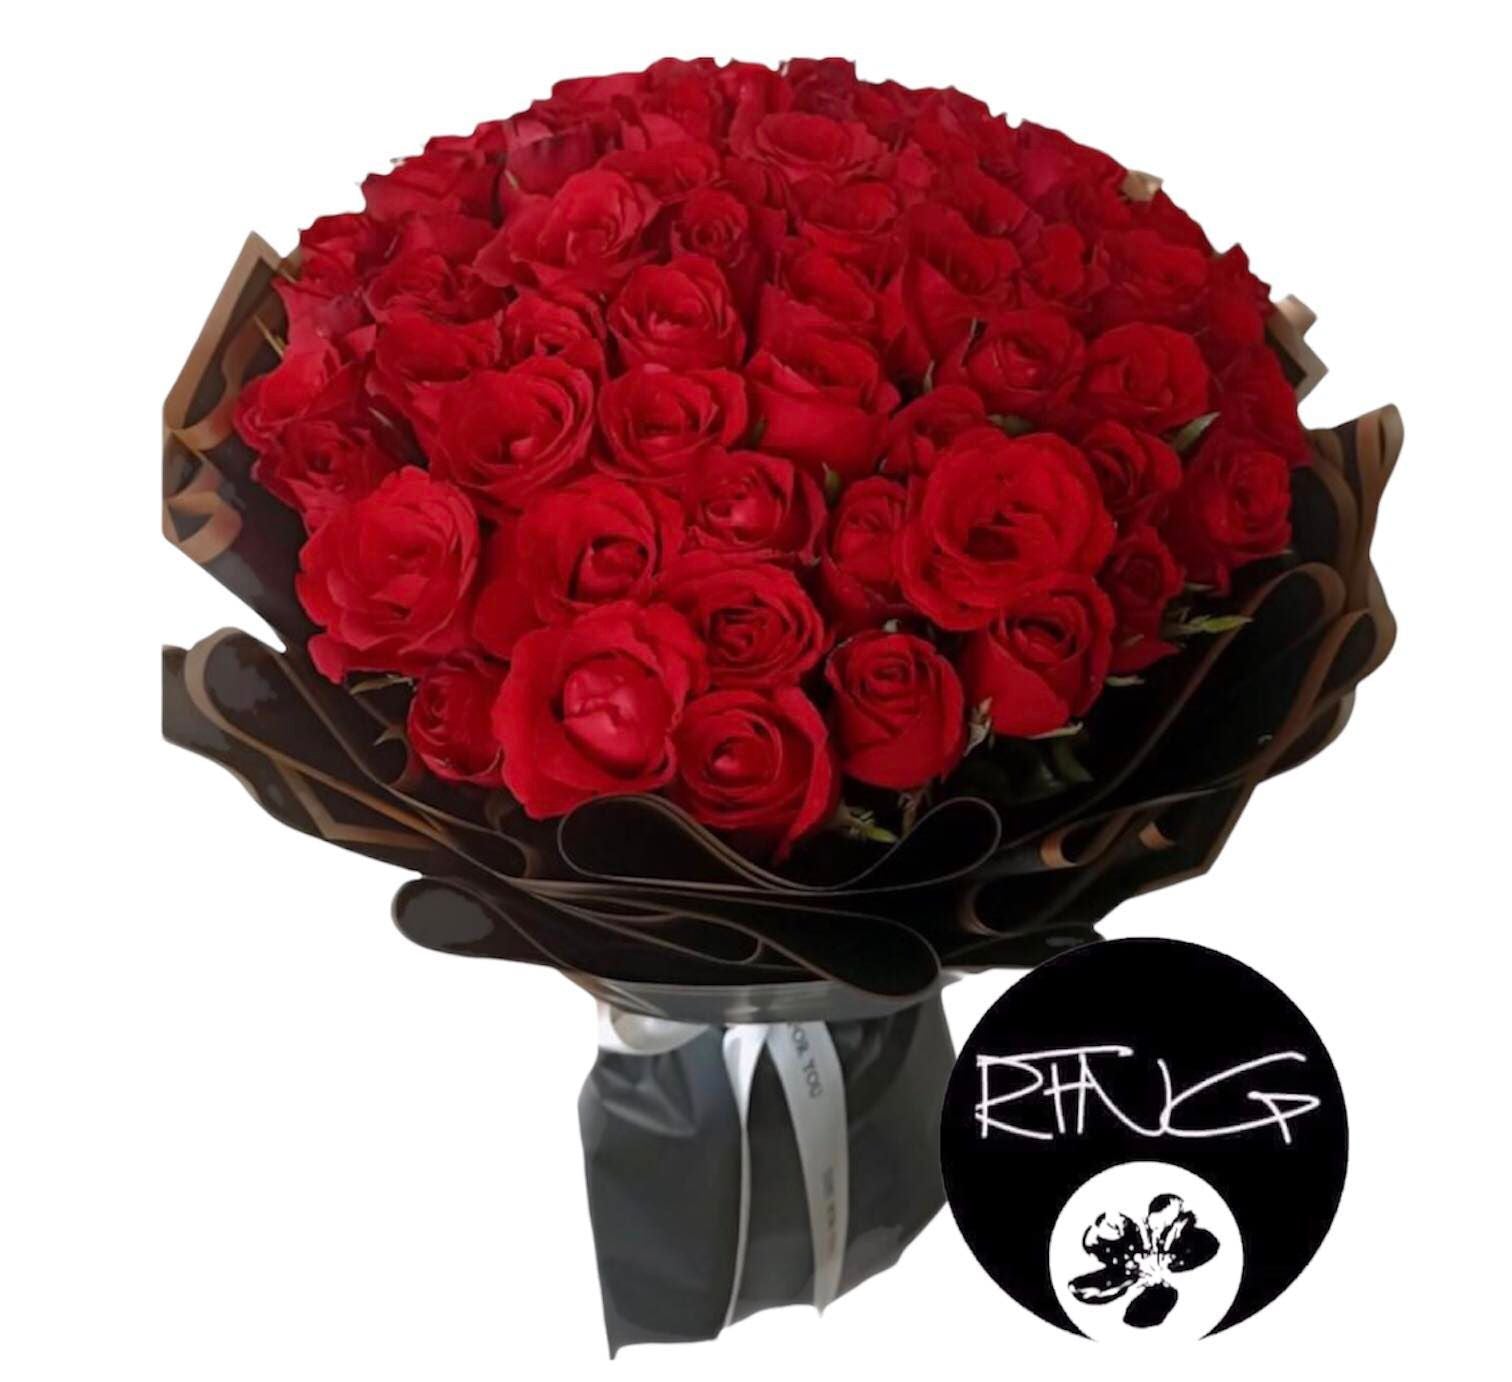 5 dz. Red Roses Round Bouquet - Redflowersngifts.com